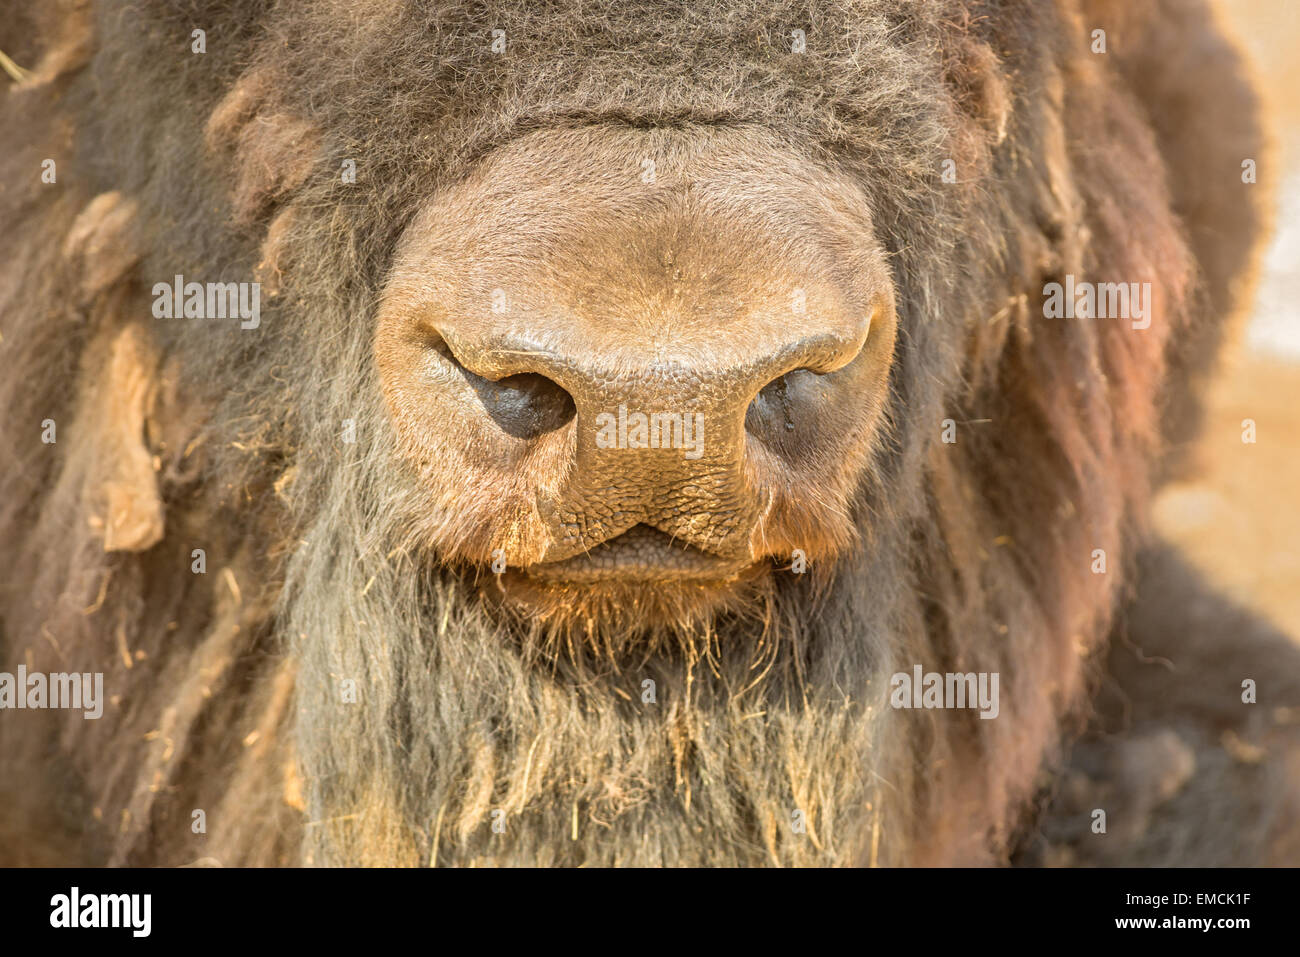 Bison nose close-up Stock Photo